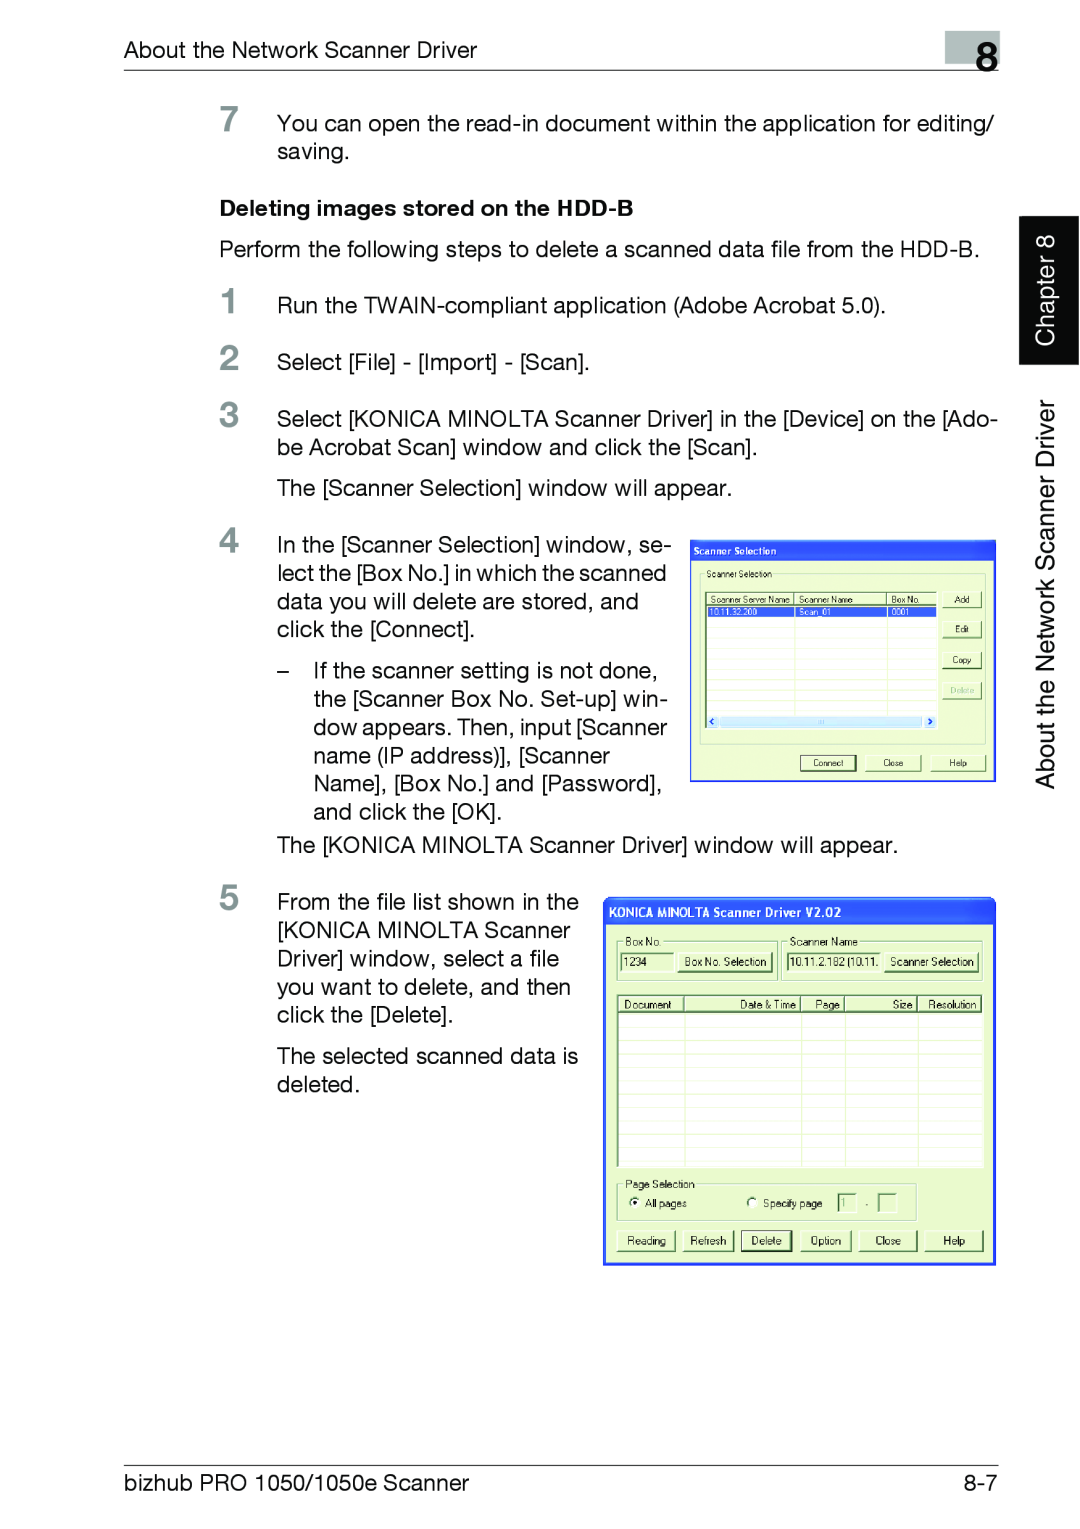 Konica Minolta 1050E appendix Deleting images stored on the HDD-B, Chapter, About the Network Scanner Driver 